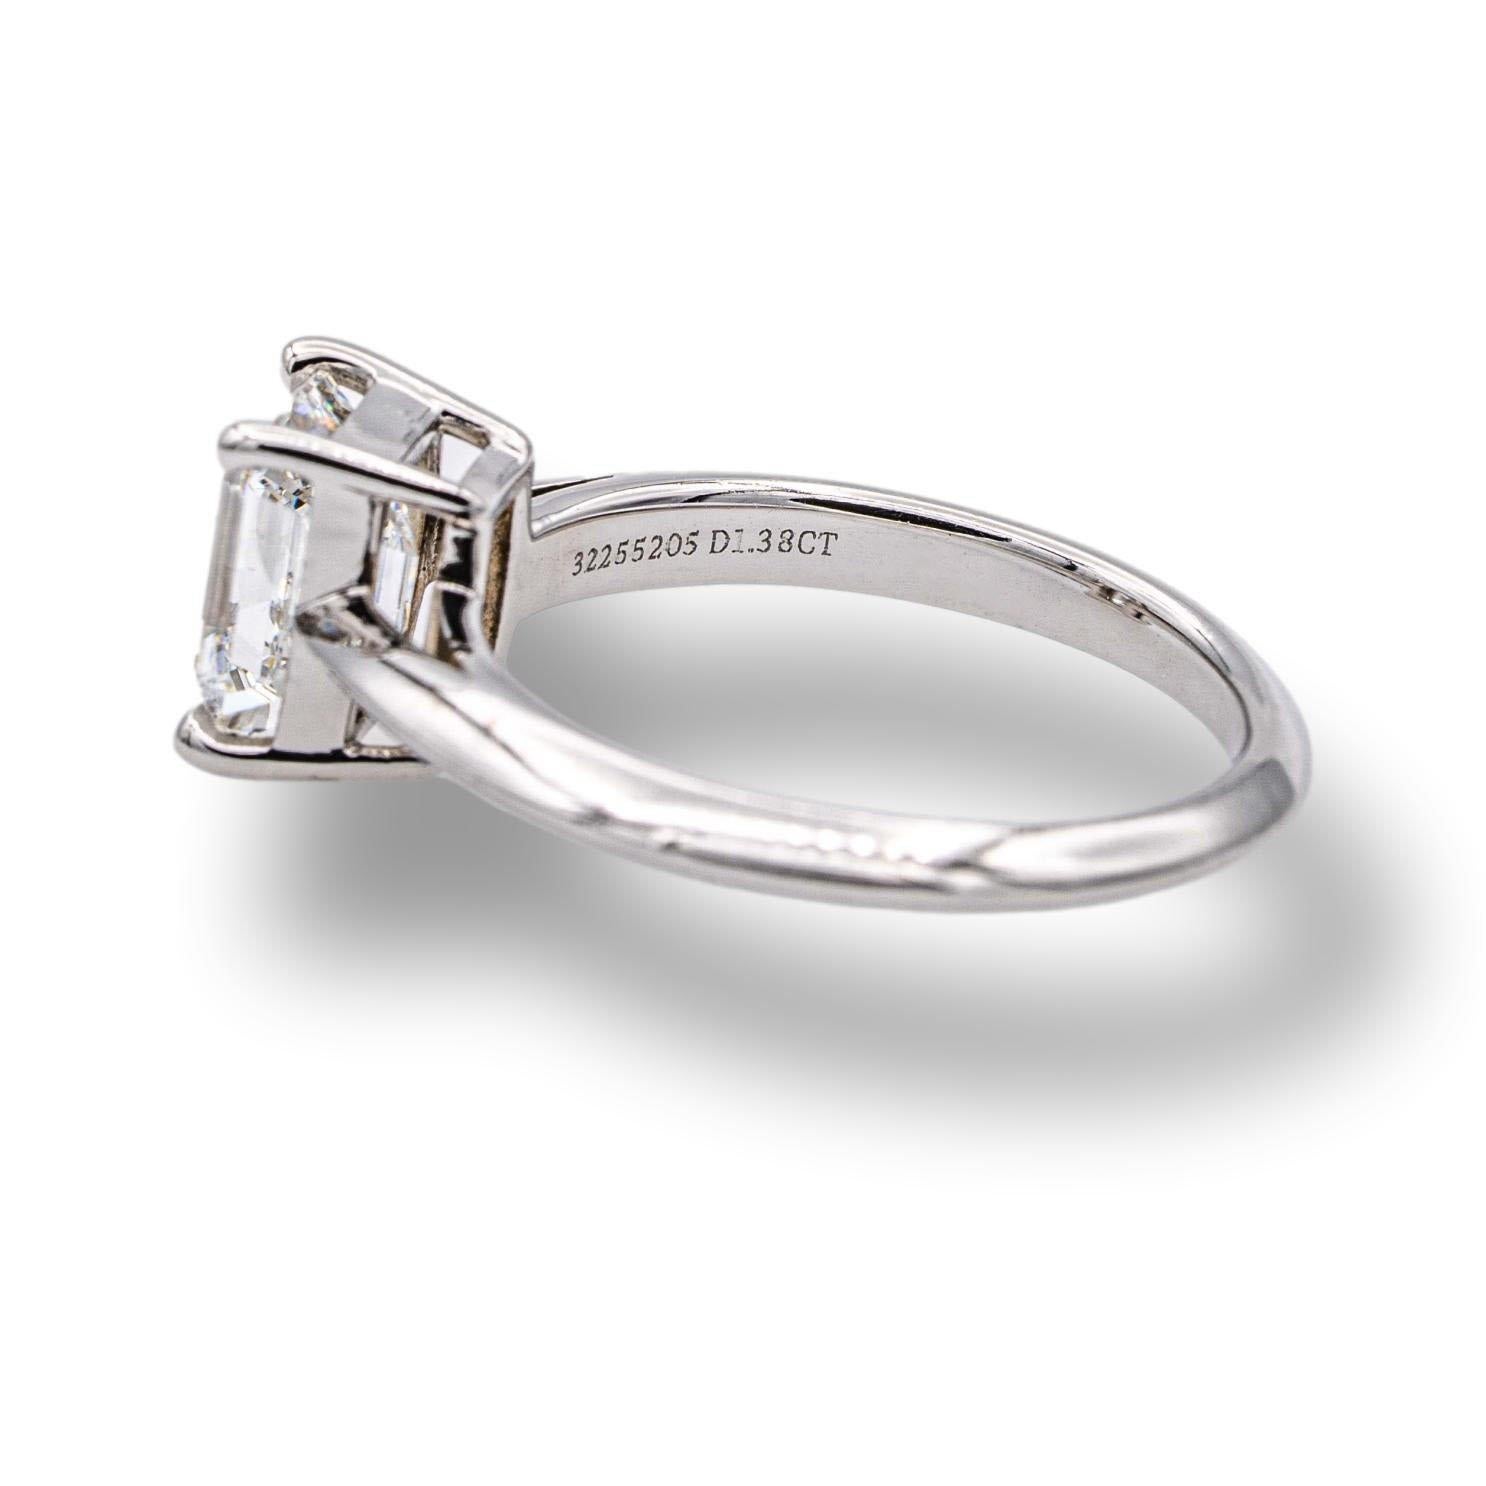 Tiffany & Co. engagement ring finely crafted in platinum with an Emerald cut diamond center weighing 1.38 carats F color VVS2 clarity. The diamond is set in a four prong basket setting with a knife edge open-gallery shank, fully hallmarked with